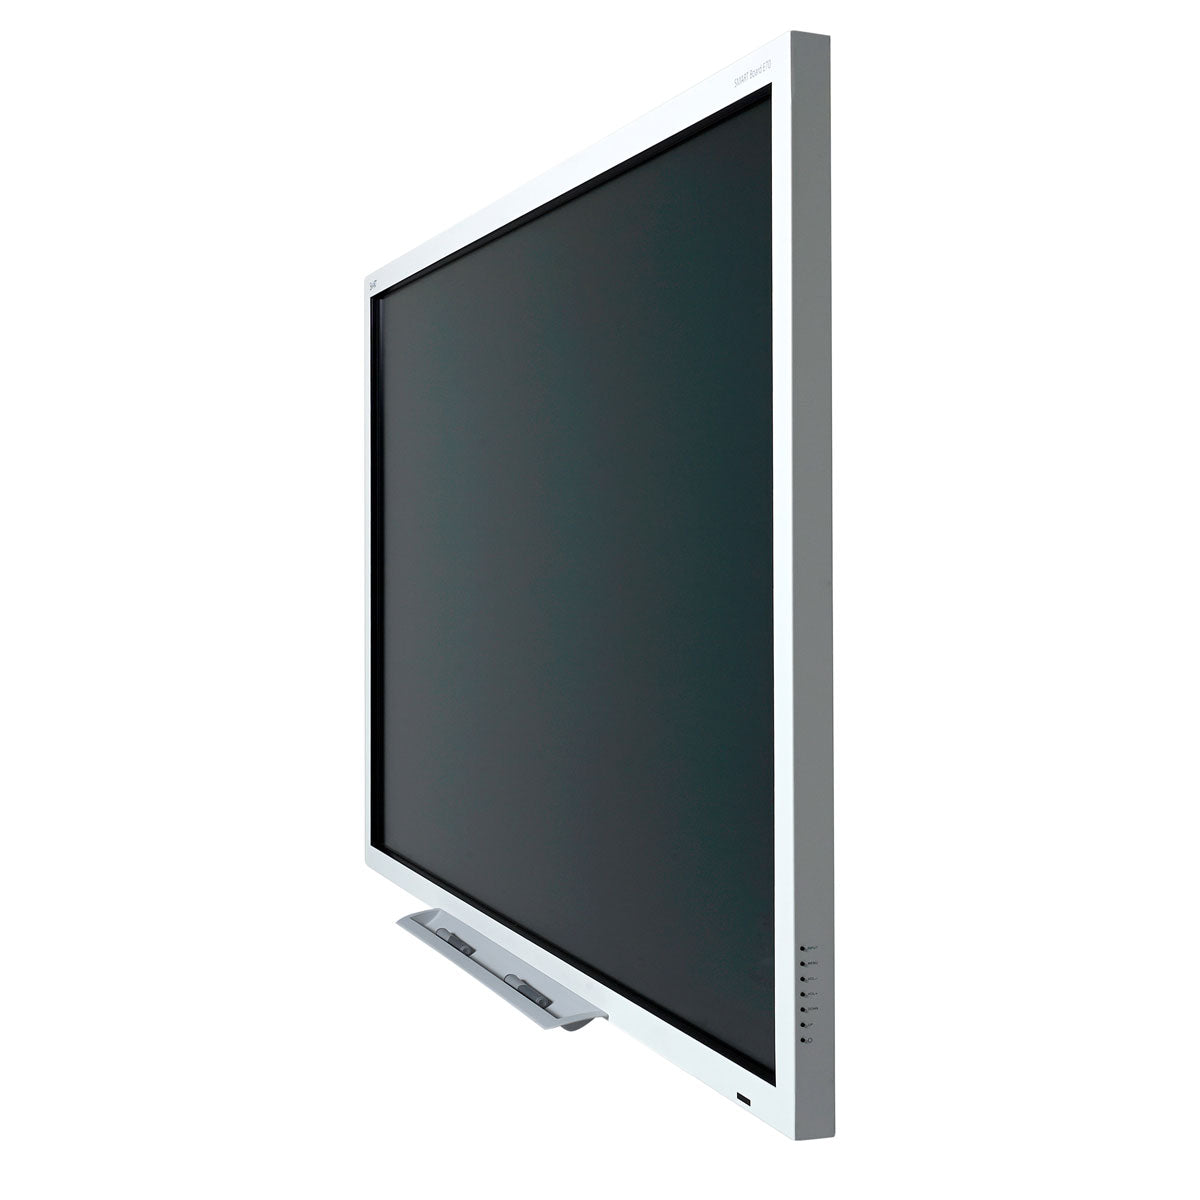 SPNL 4065 Interactive Whiteboard Flat Panel for Classroom Education (Refurbished)